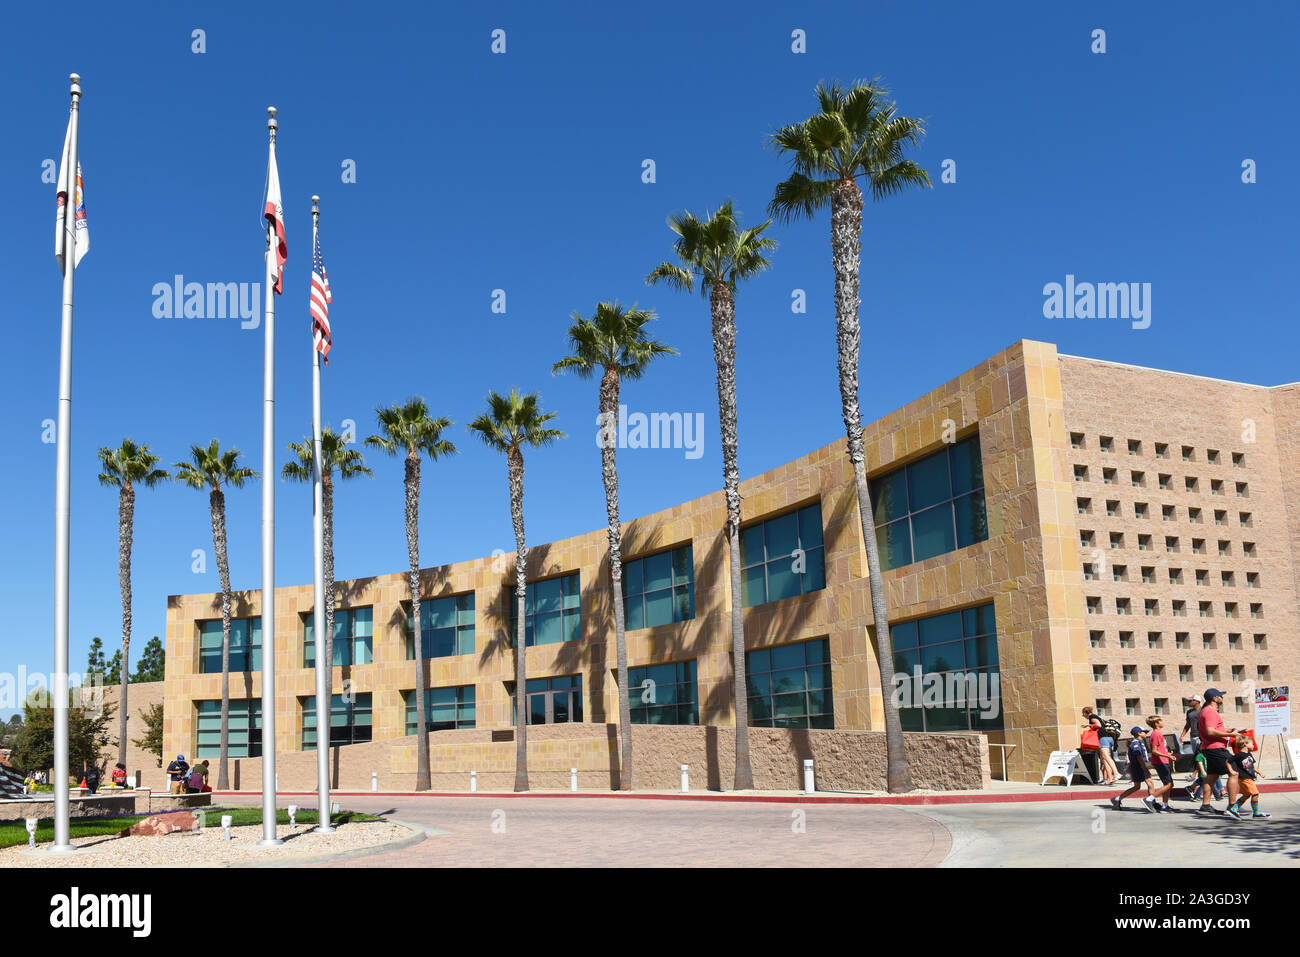 IRVINE, CALIFORNIA - 5 OCT 2019: Building at the Orange County Fire Authority Headquarters (OCFA) during their annual open house. Stock Photo